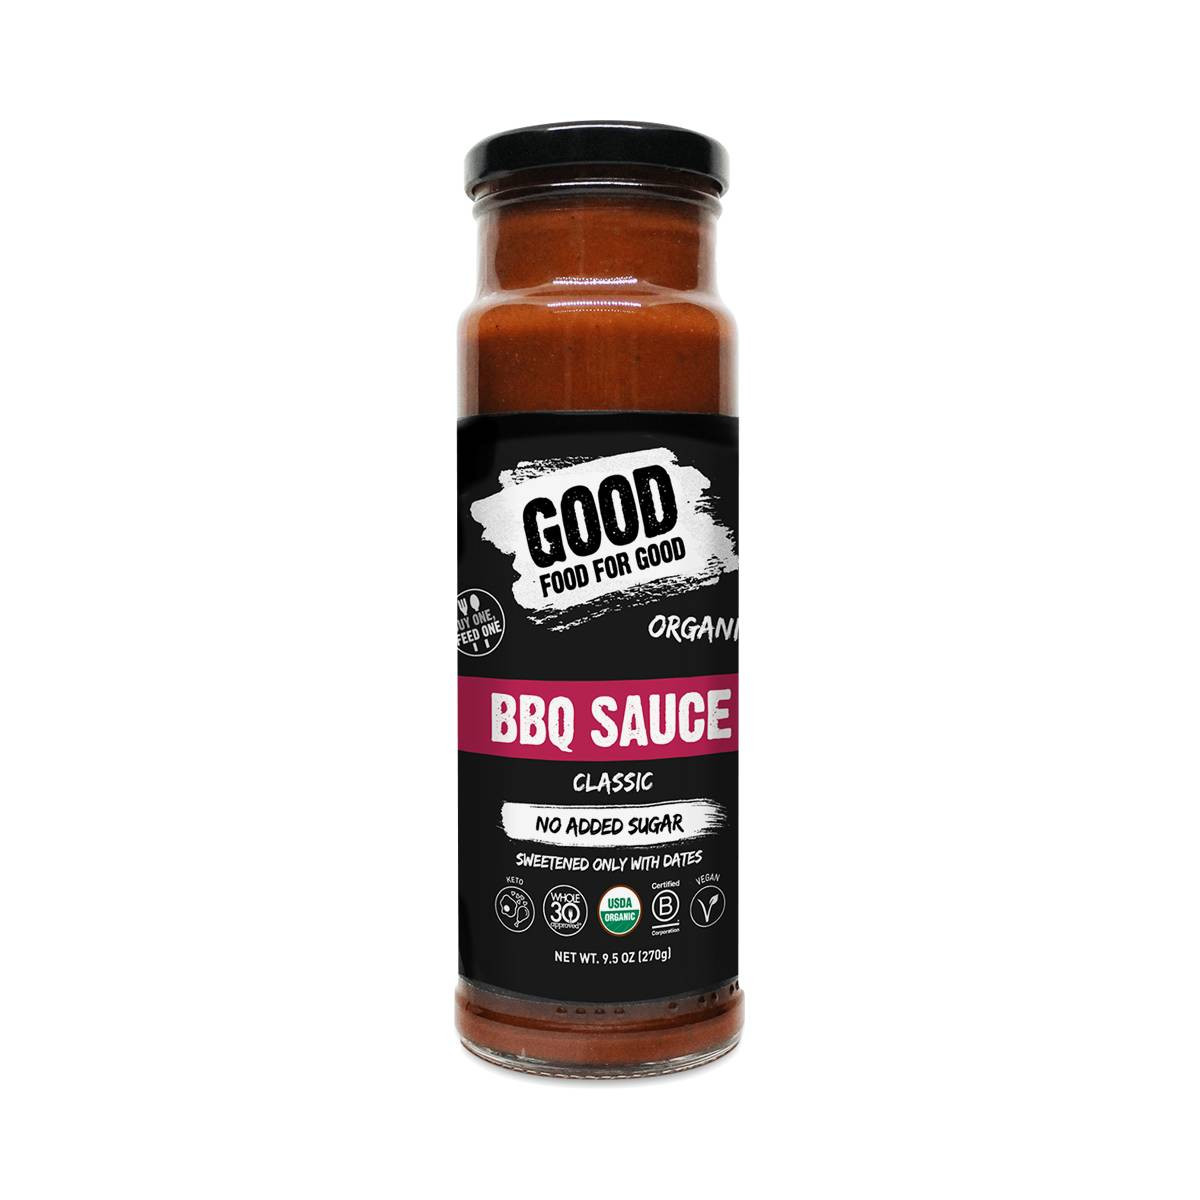 Rudy'S Bbq Sauce
 Classic BBQ Sauce by Good Food for Good Thrive Market